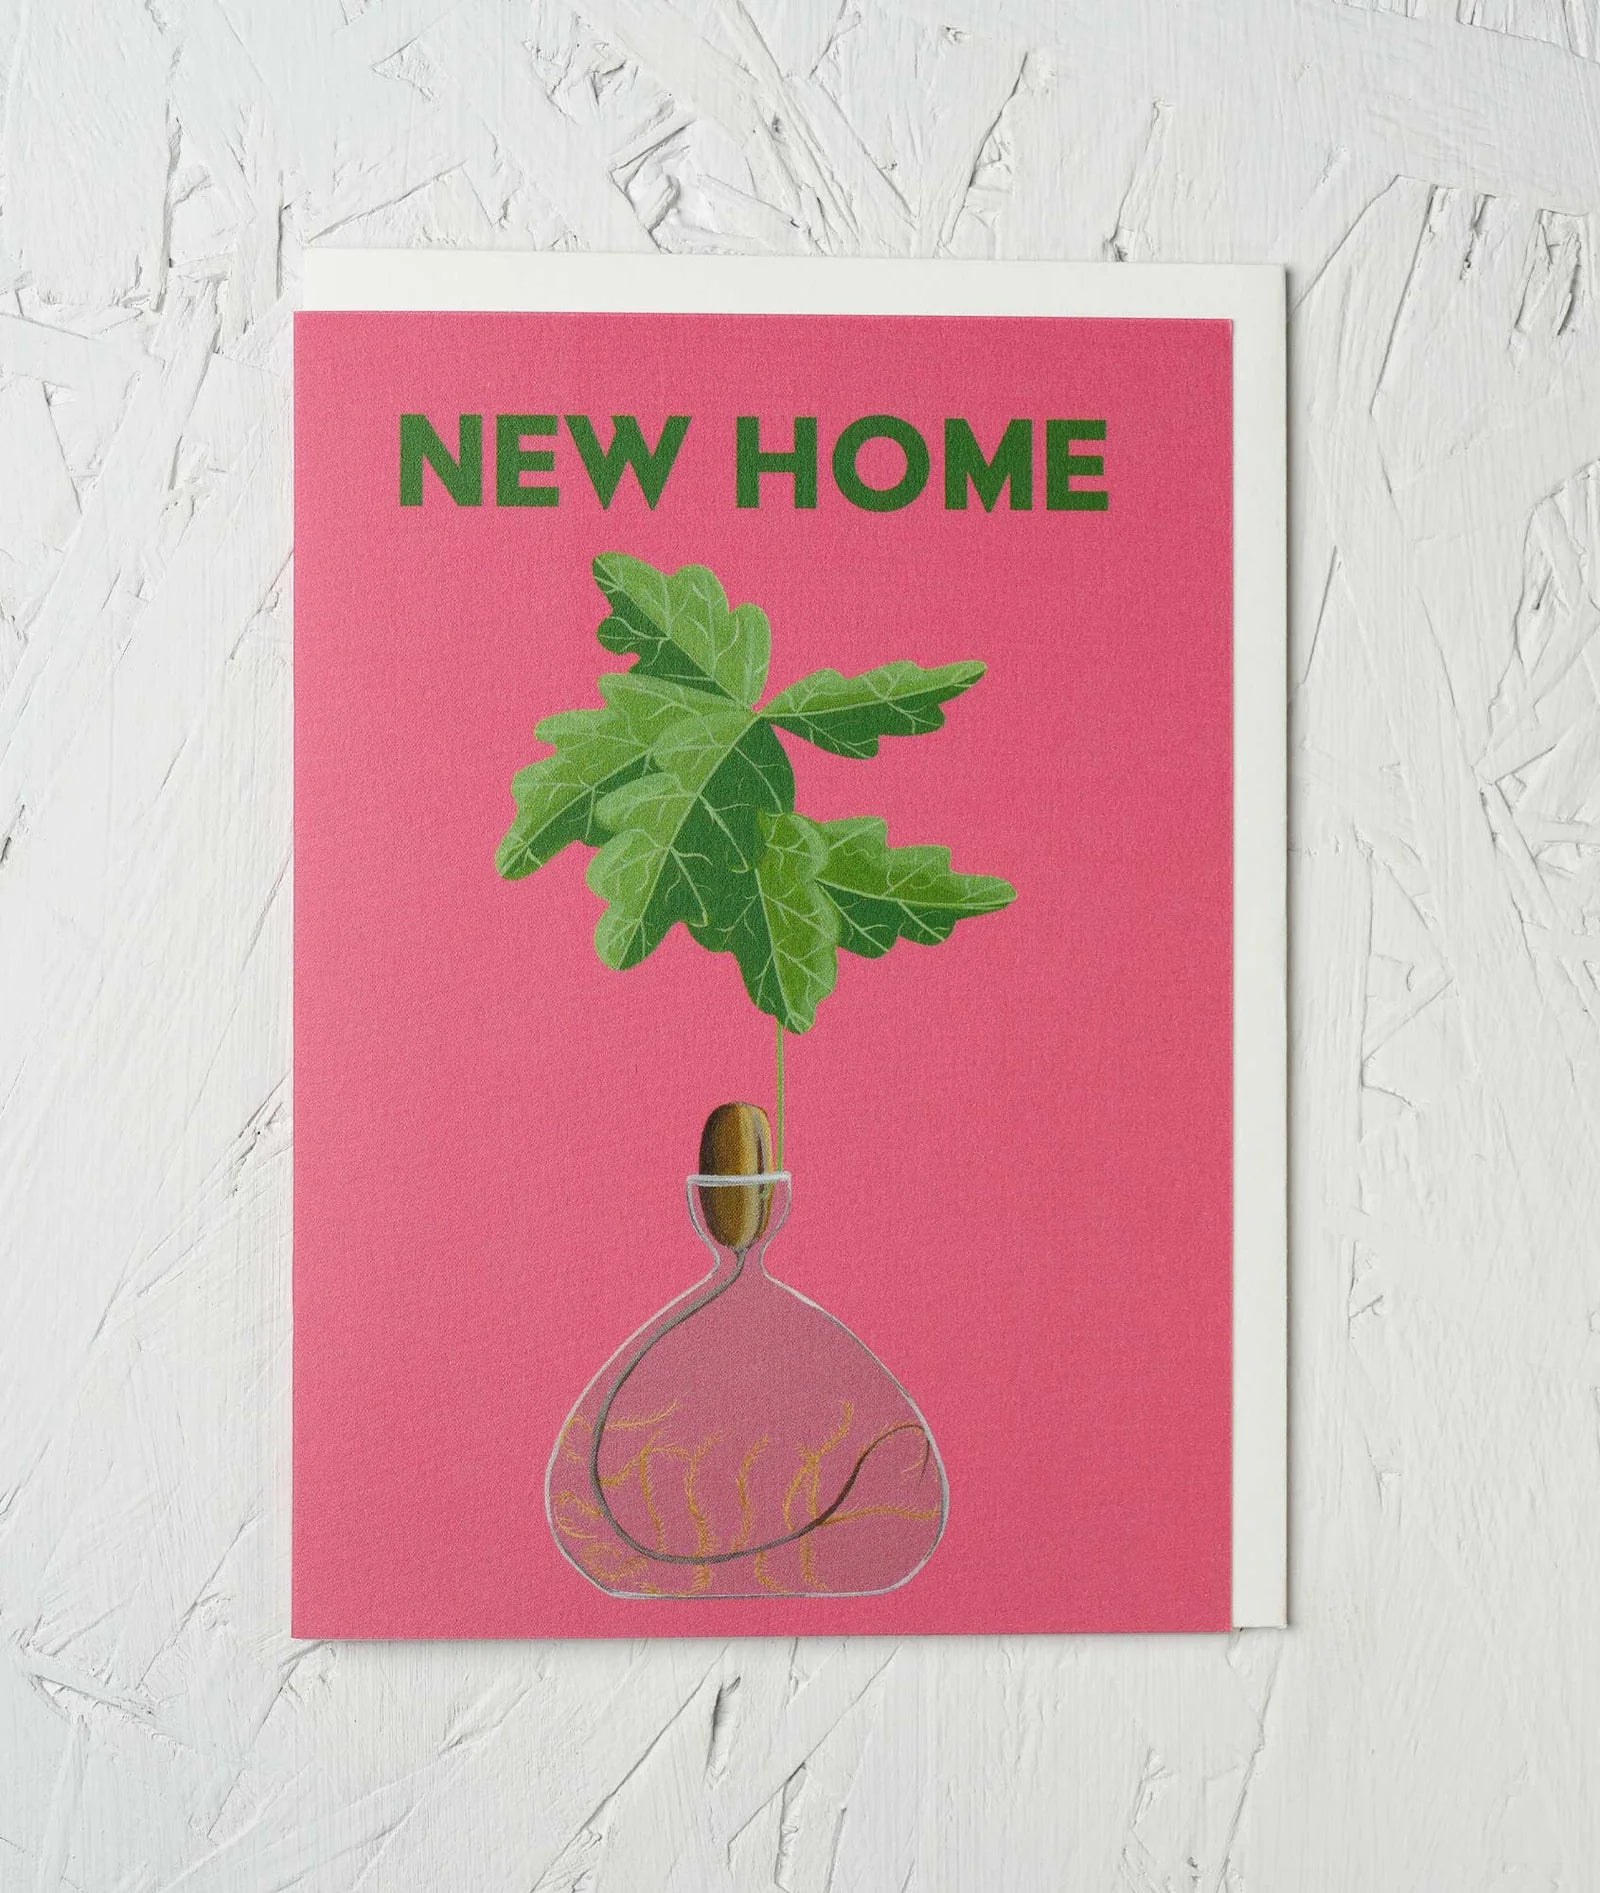 NEW HOME | CARD BY STENGUN DRAWINGS